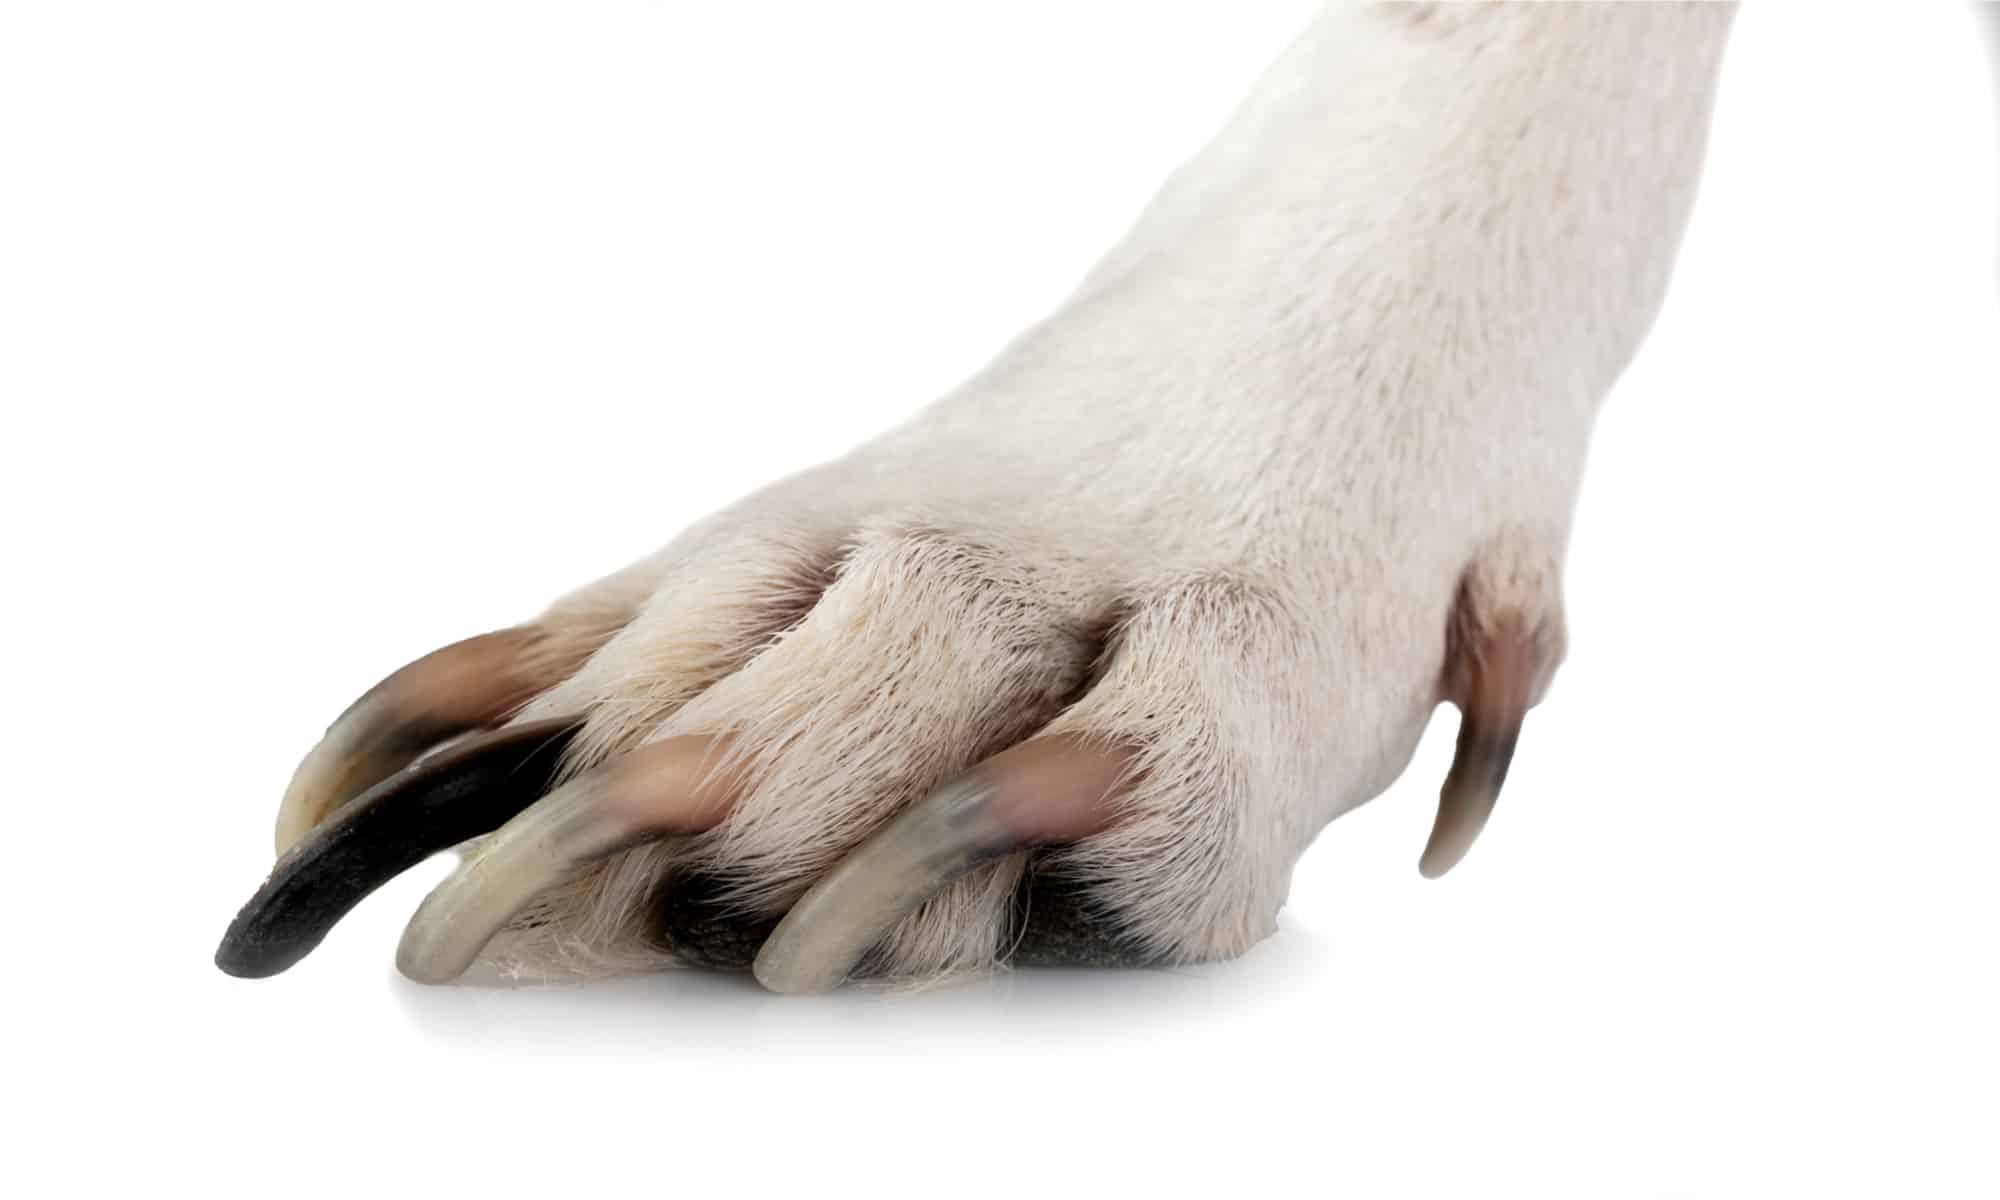 top-21-how-many-claws-does-a-dog-have-on-each-paw-lastest-updates-10-2022